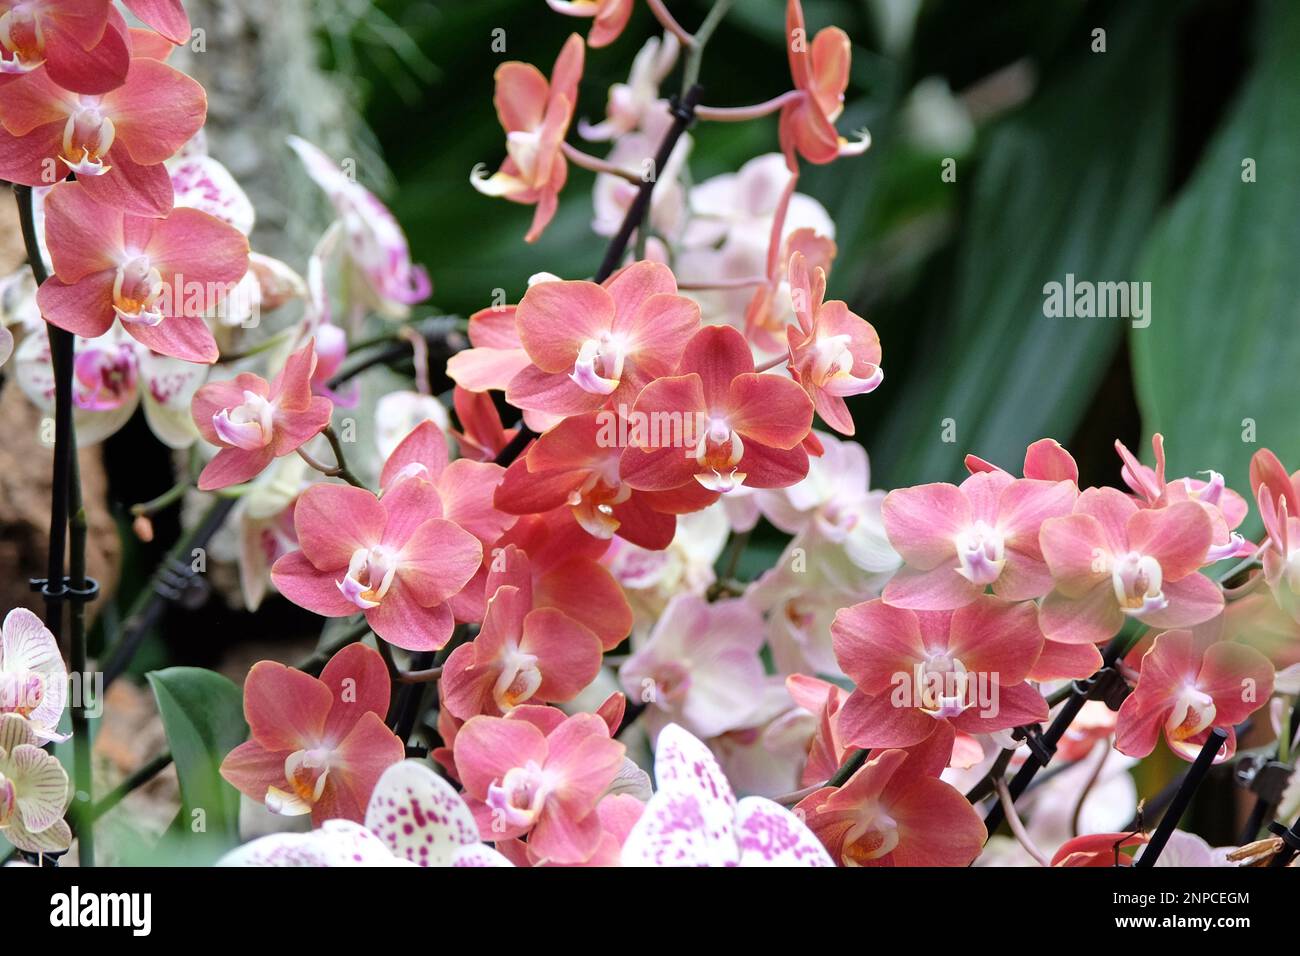 Dusky pink phalaenopsis moth orchids in flower. Stock Photo